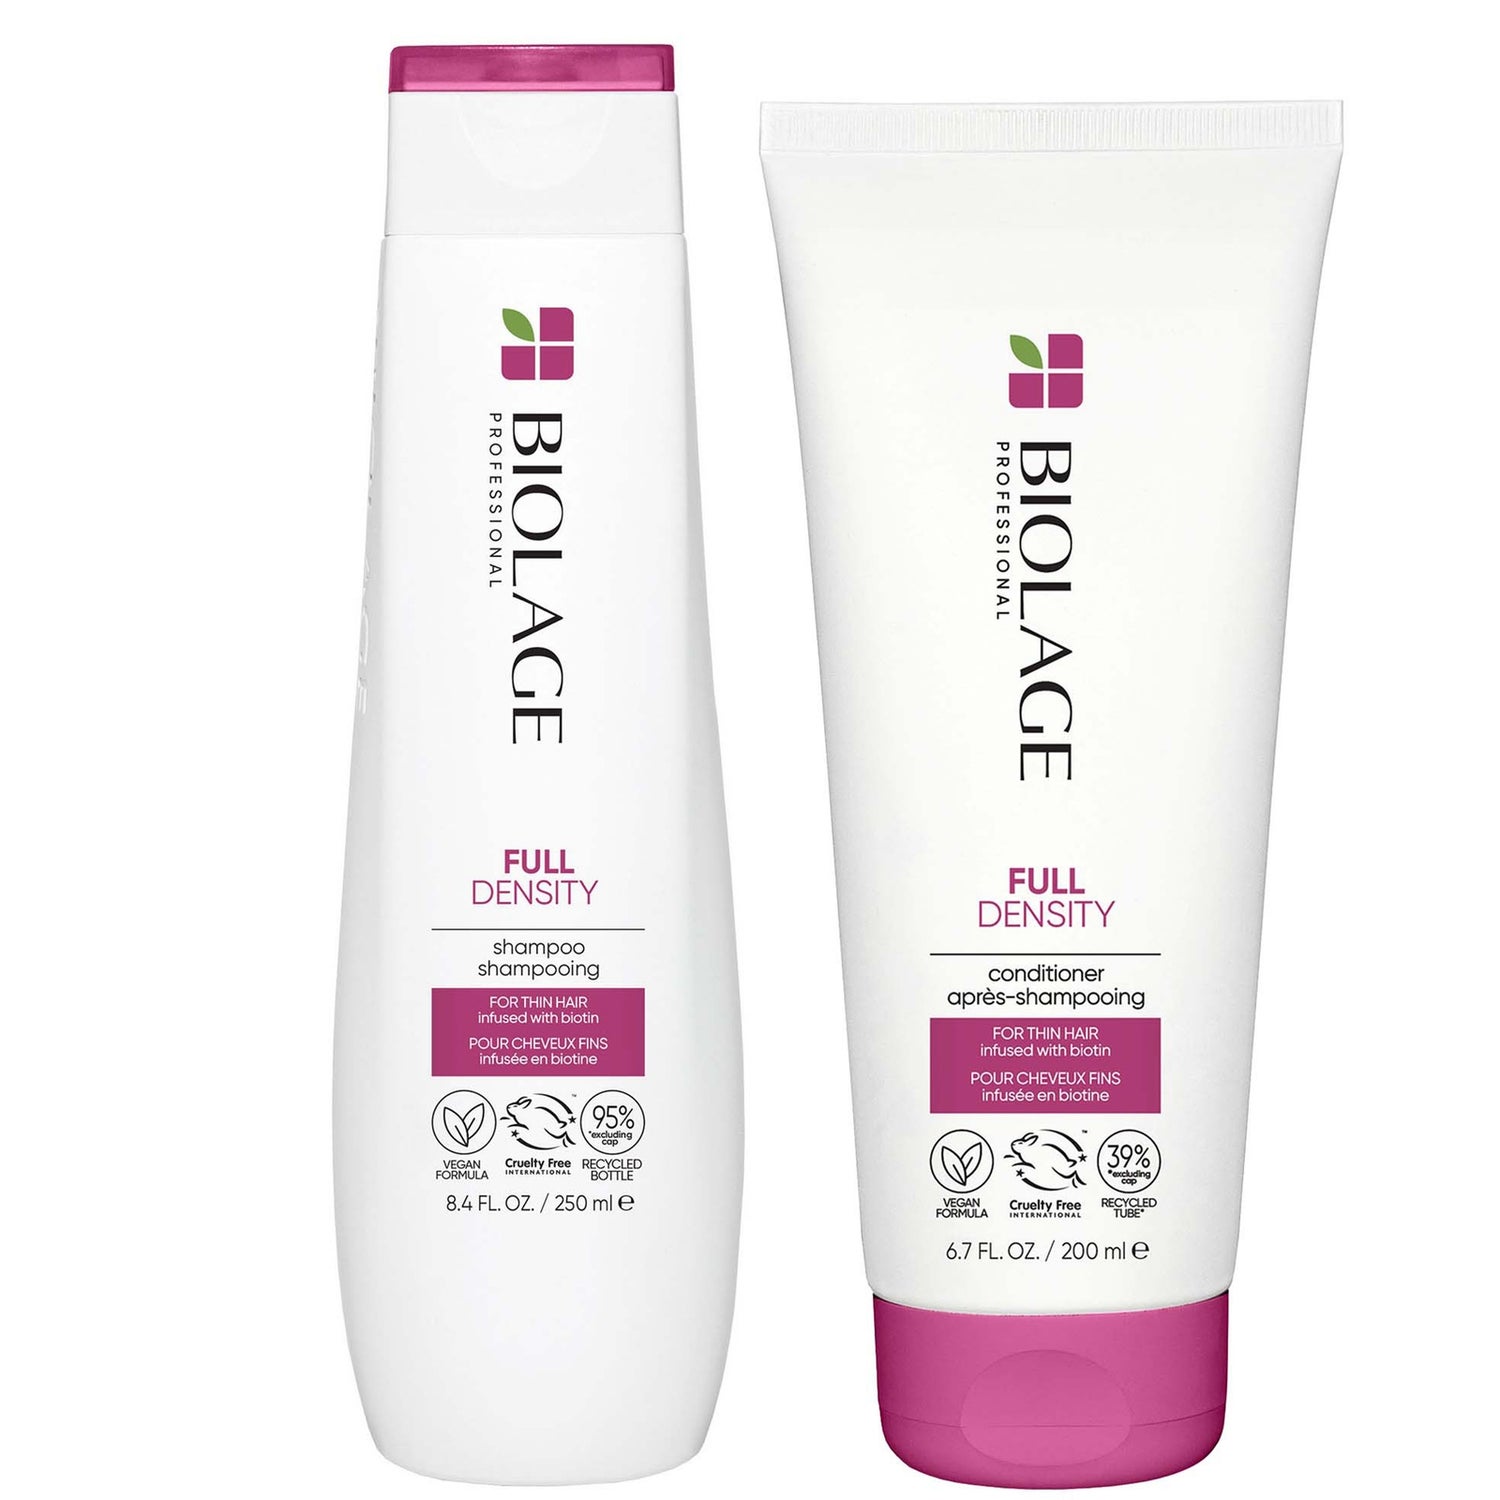 Biolage Advanced FullDensity Thickening Shampoo (250ml) and Conditioner (200ml) Duo Set for Thin Hair